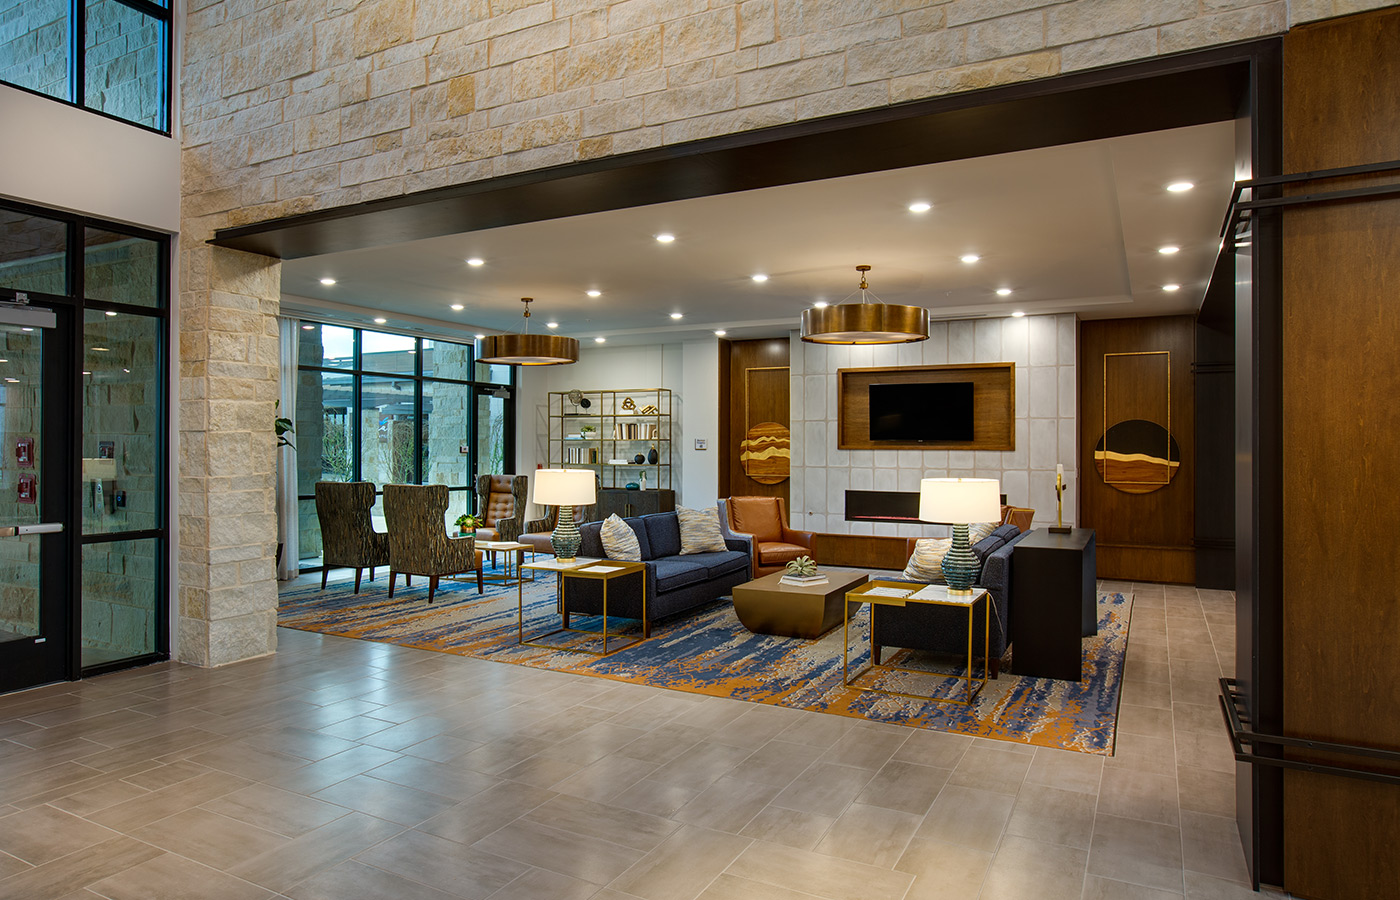 The lobby with seating and a fireplace.